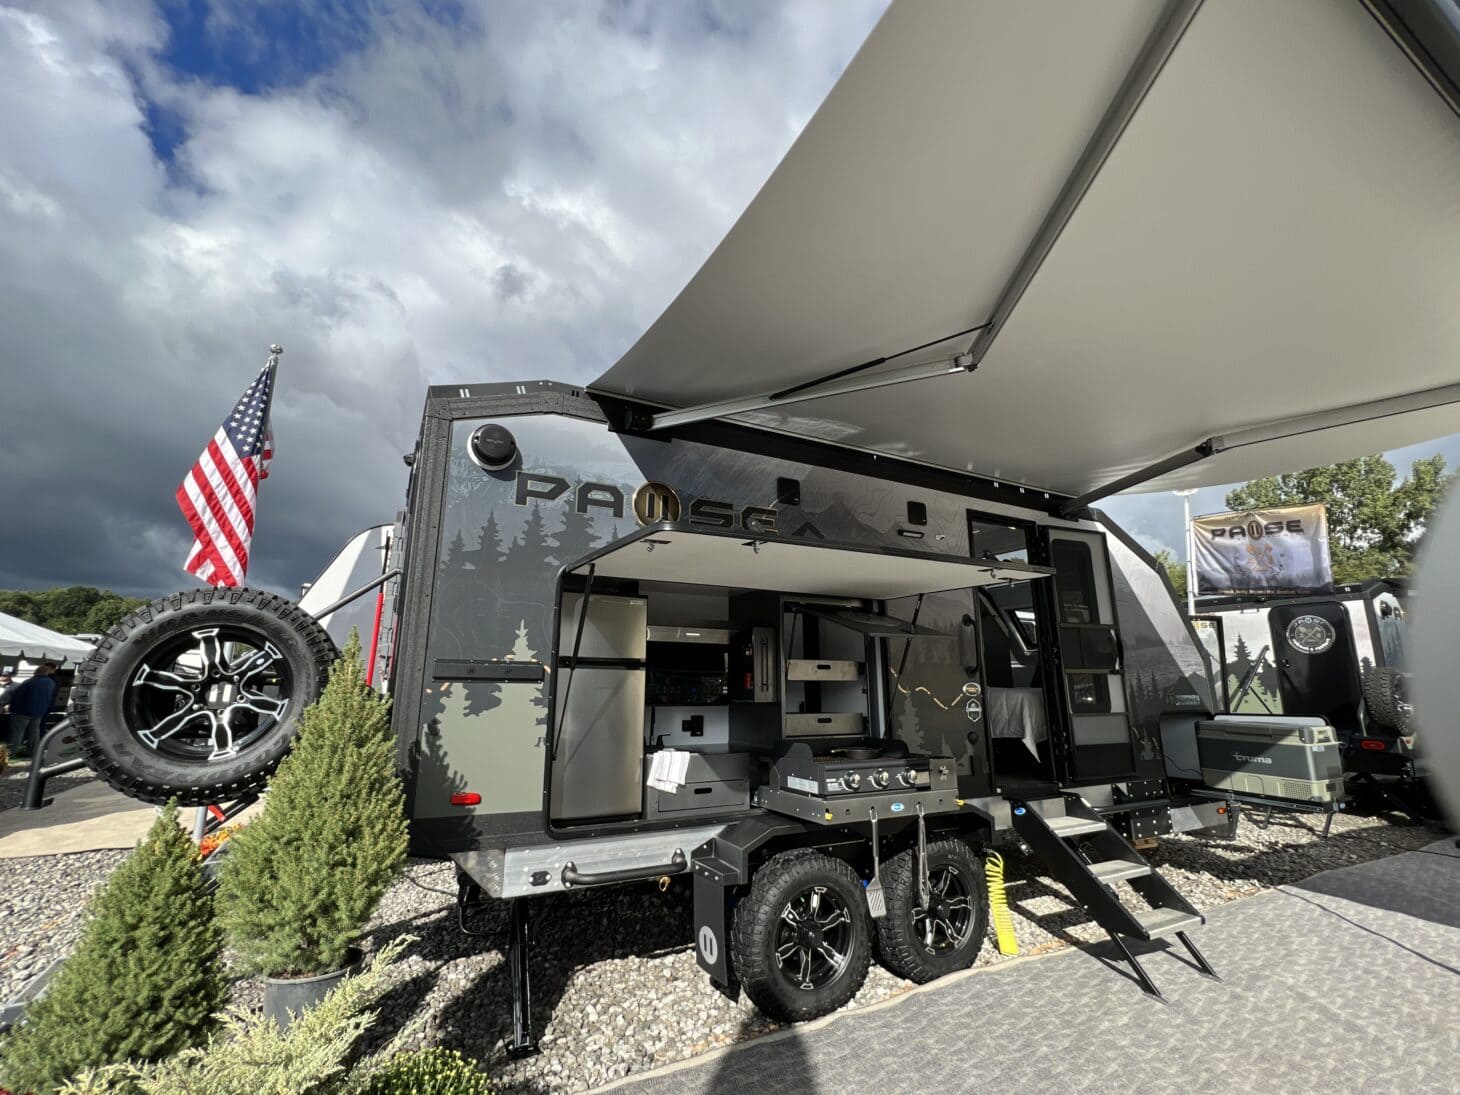 A rugged off-grid trailer with an outdoor kitchen and open awning